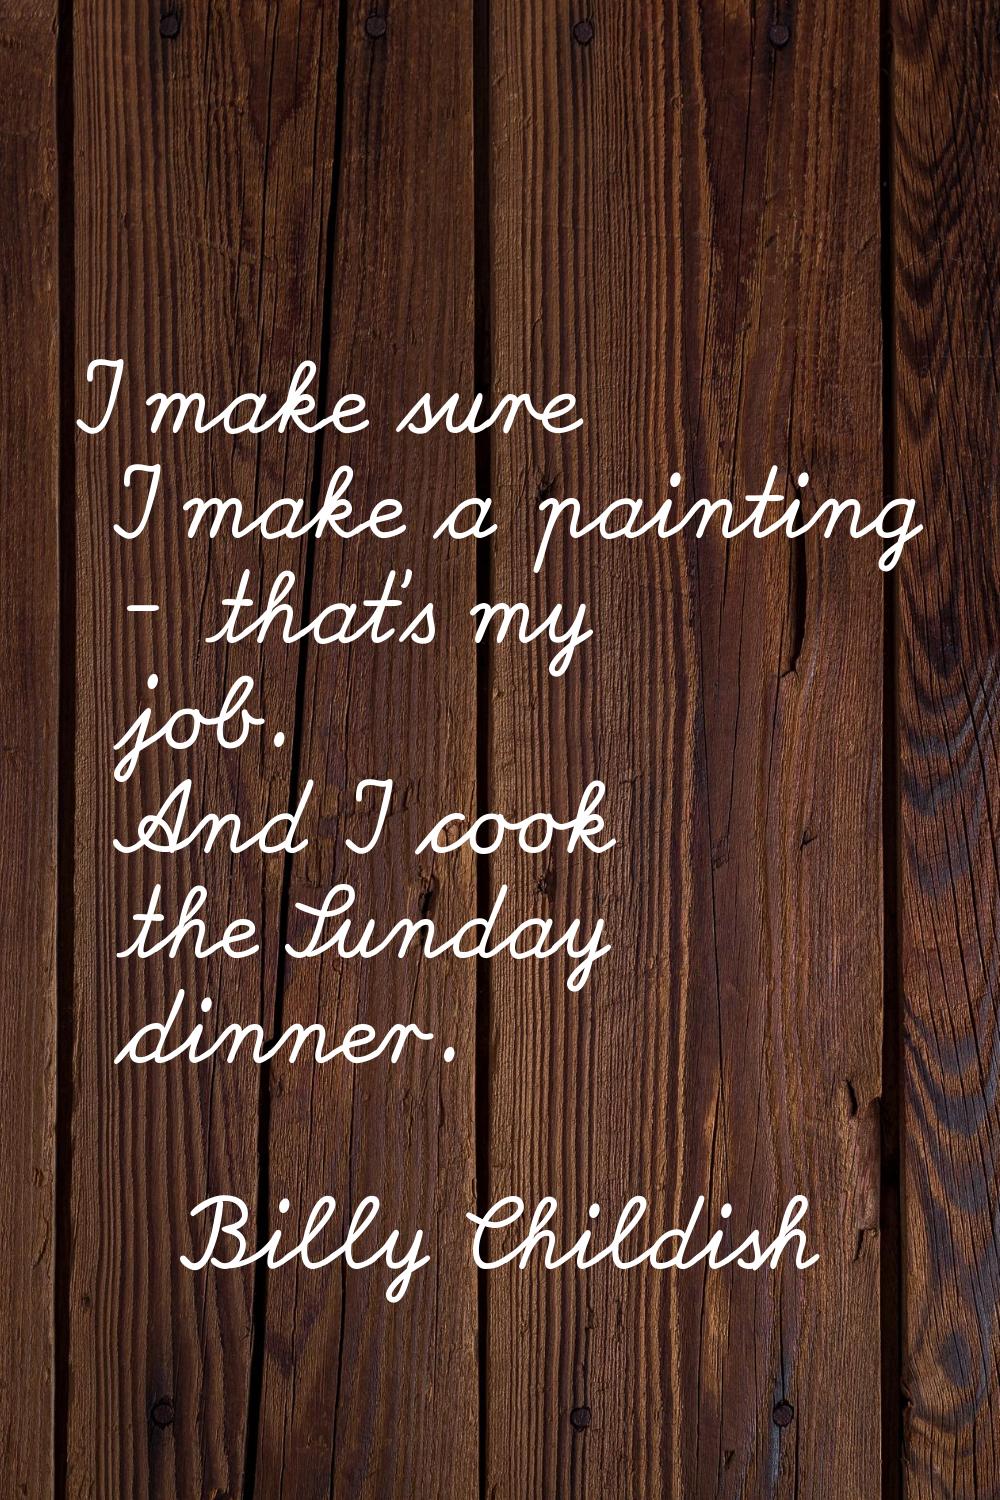 I make sure I make a painting - that's my job. And I cook the Sunday dinner.